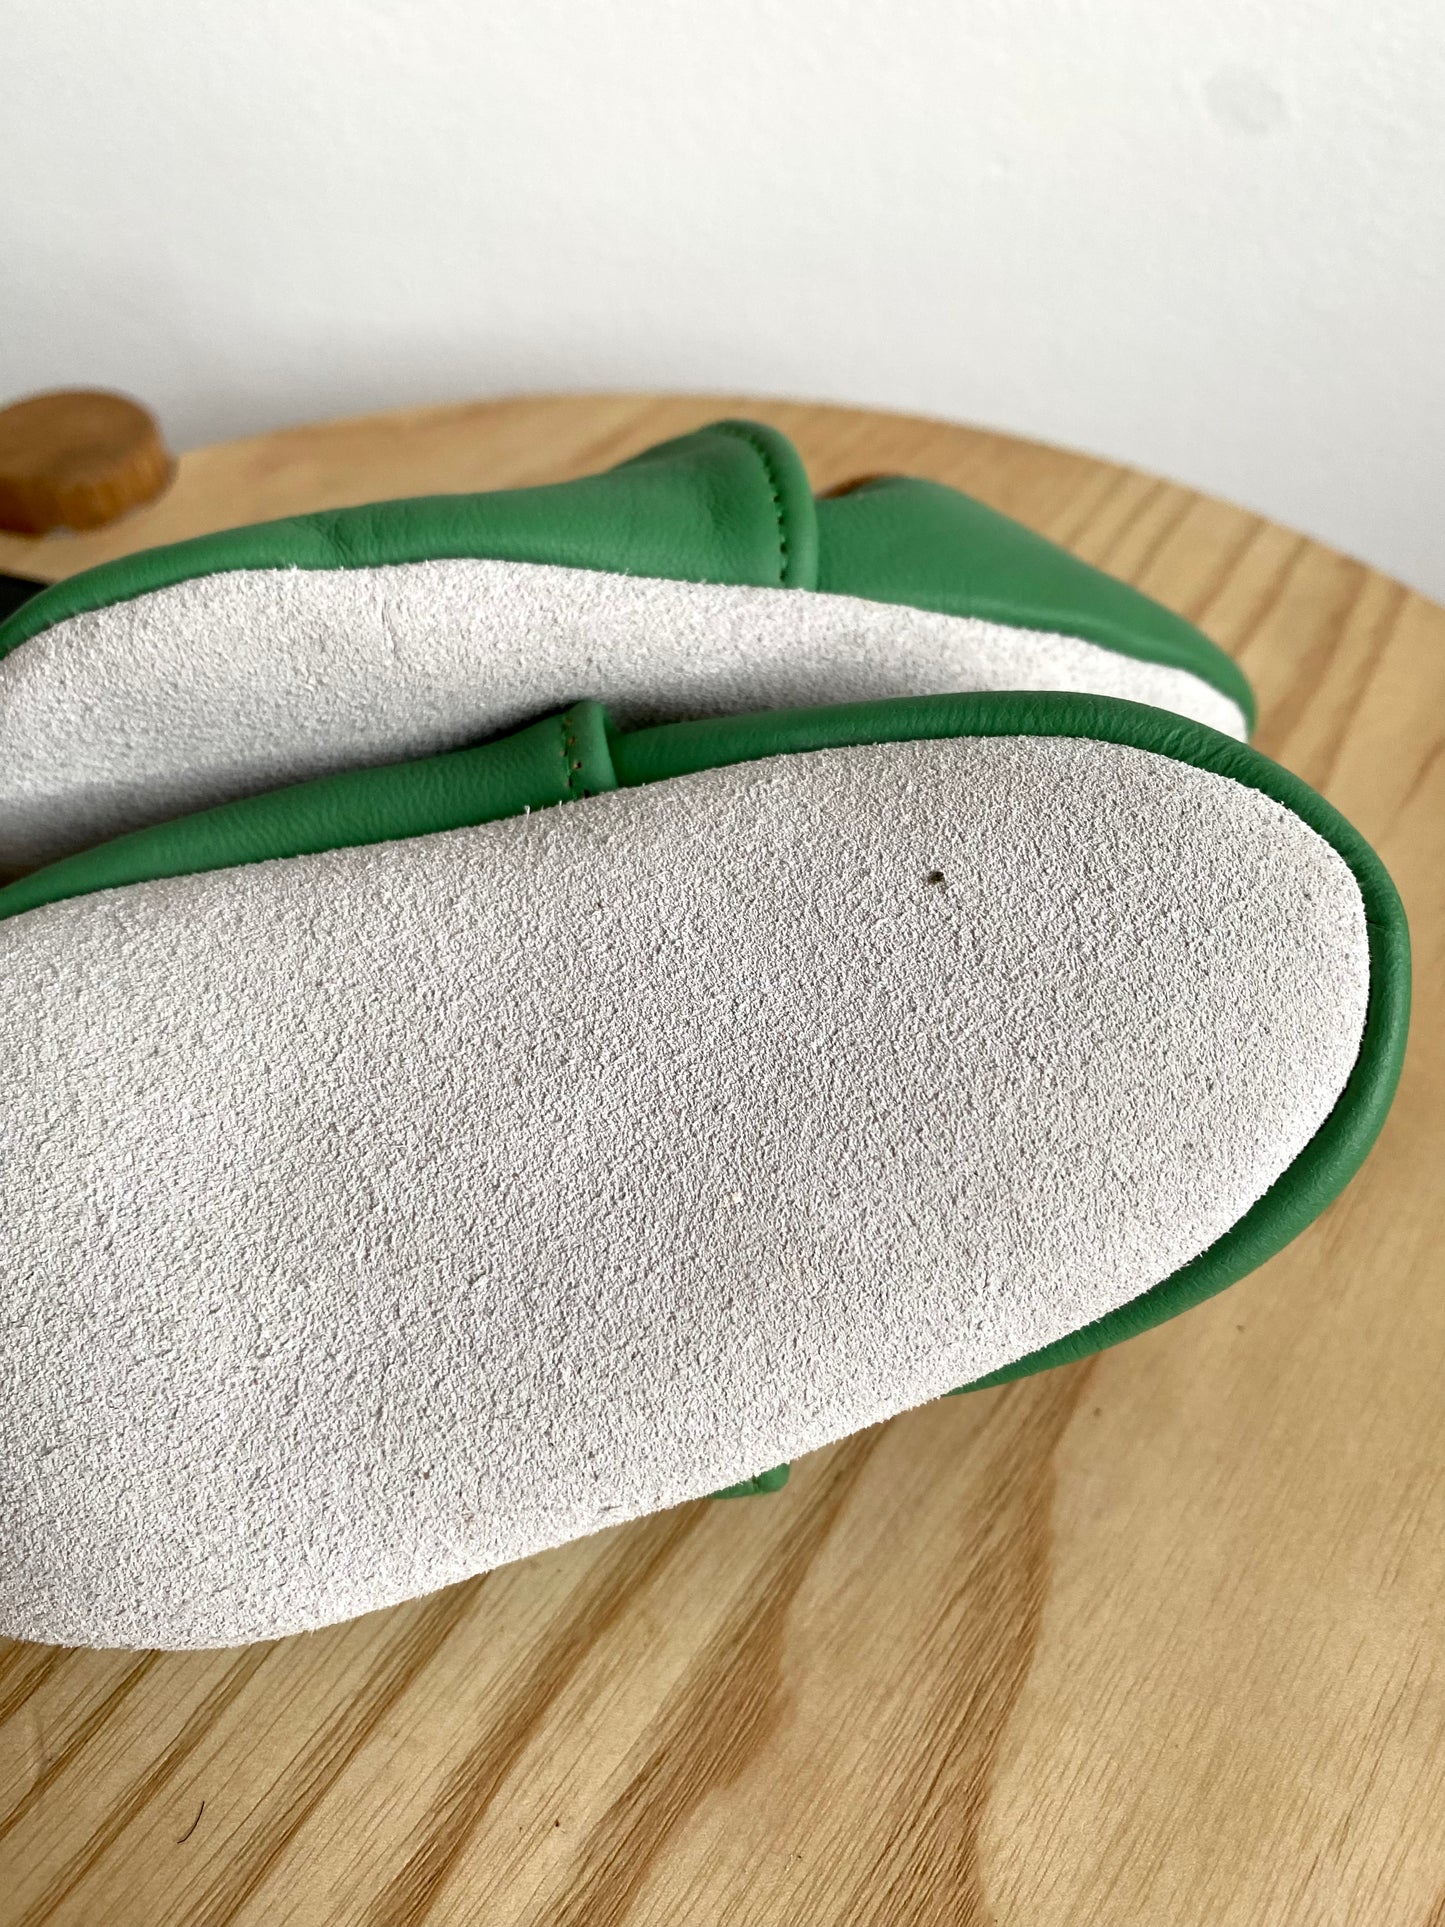 Soft Sole Frog Leather Shoes / Size 4 Toddler